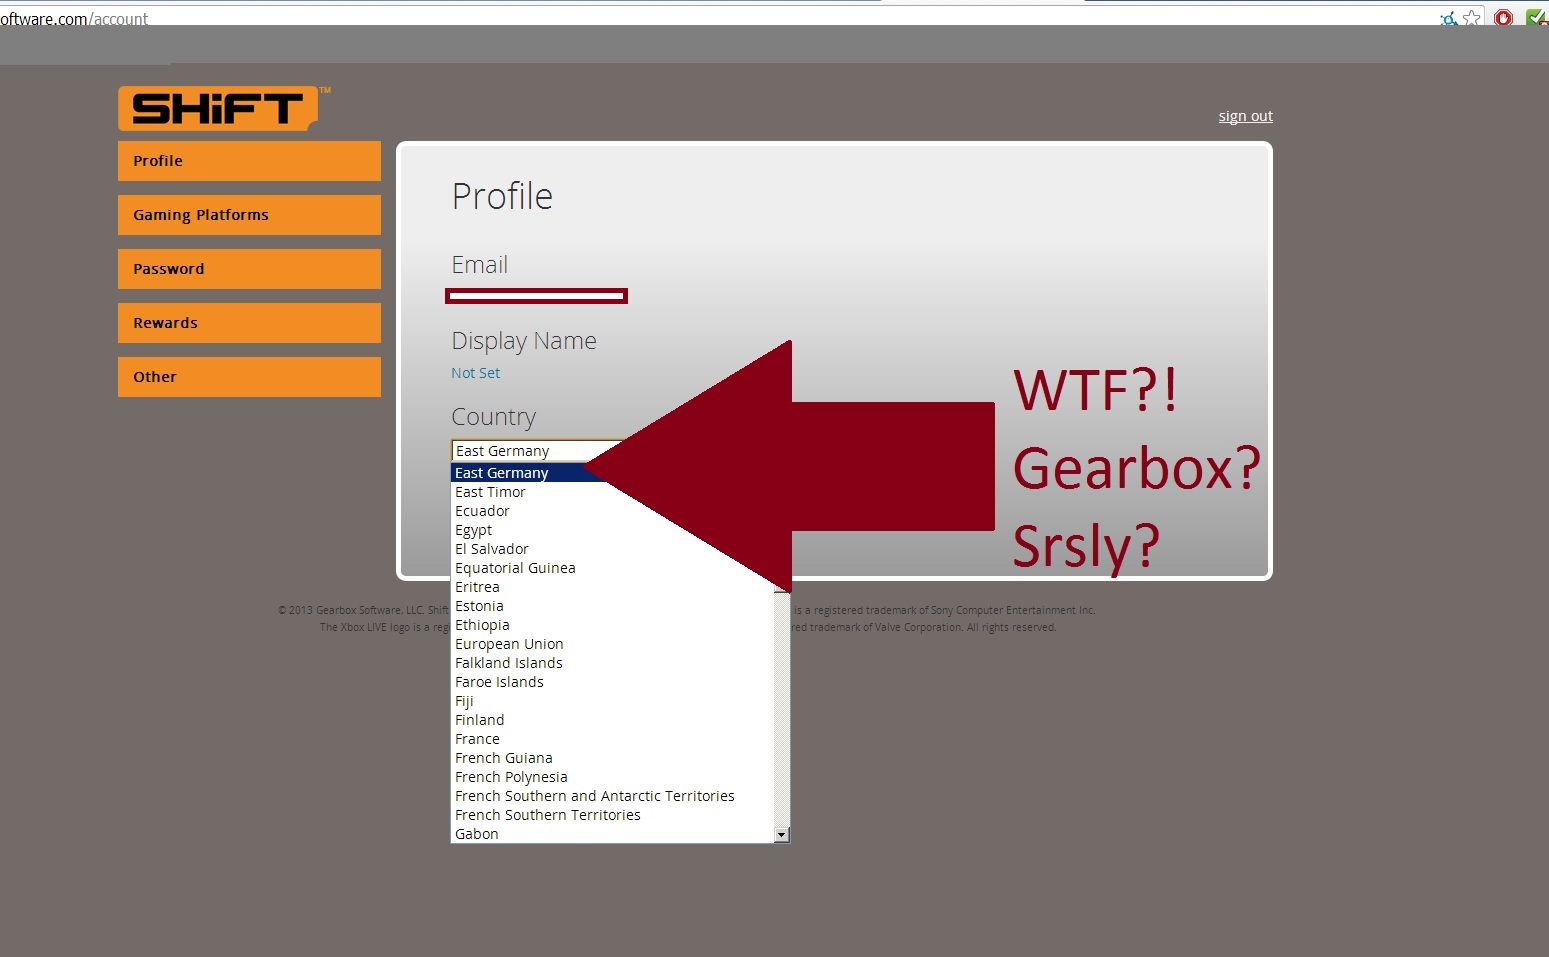 Srsly Gearbox? Do you even unite?